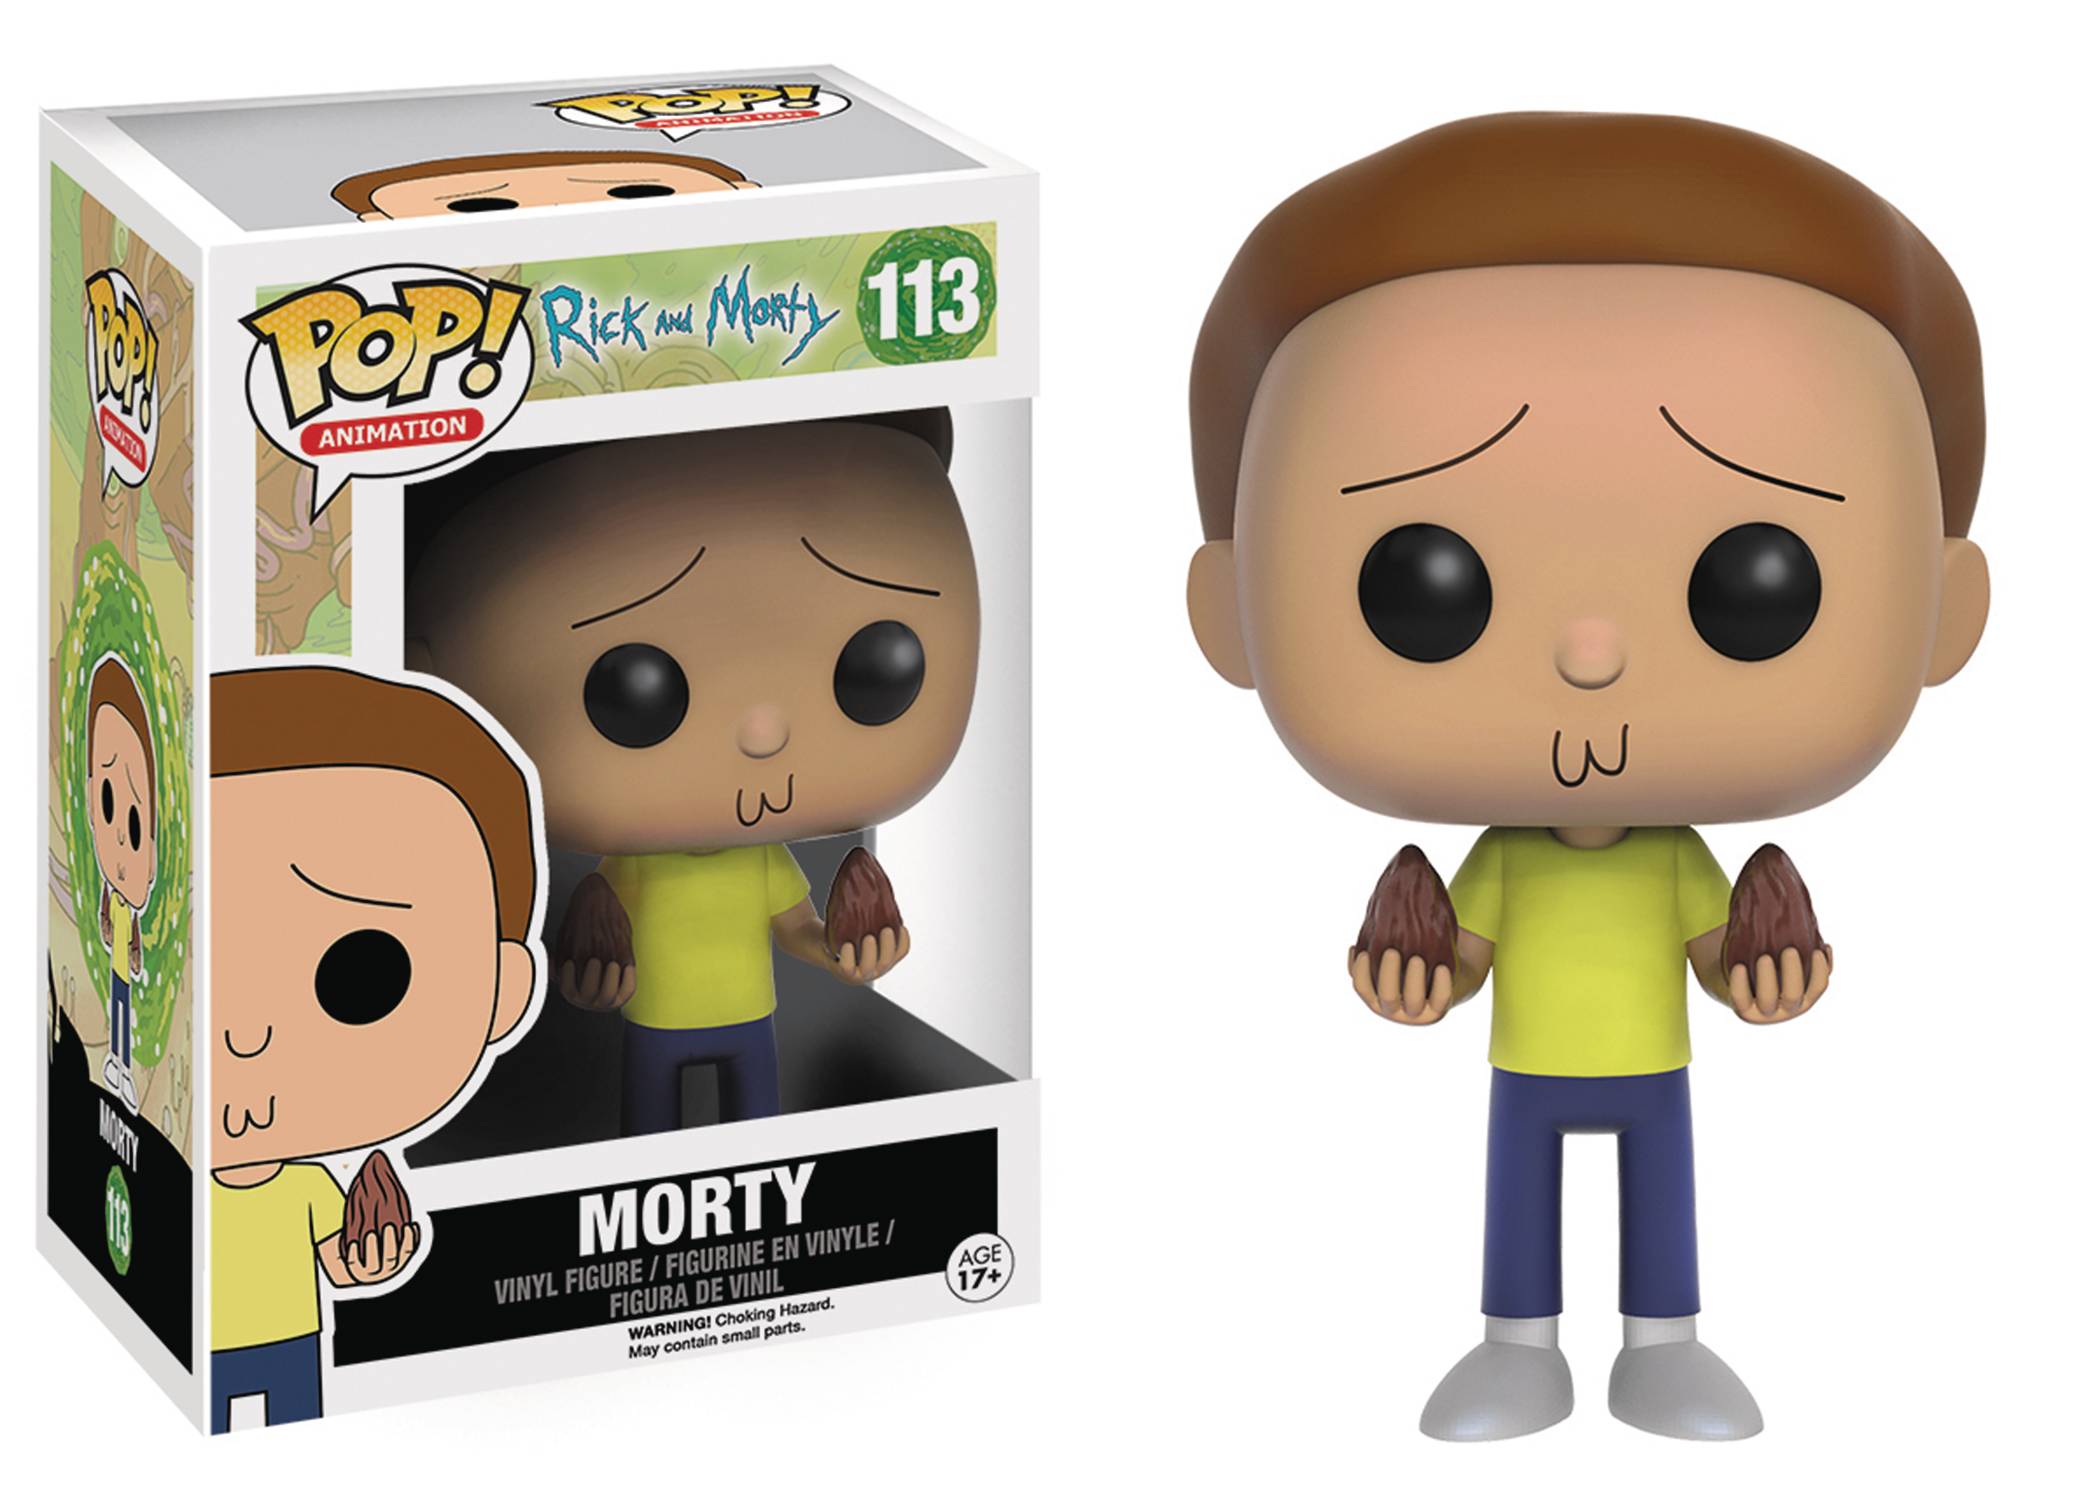 Pop Animation Rick and Morty Morty Vinyl Figure